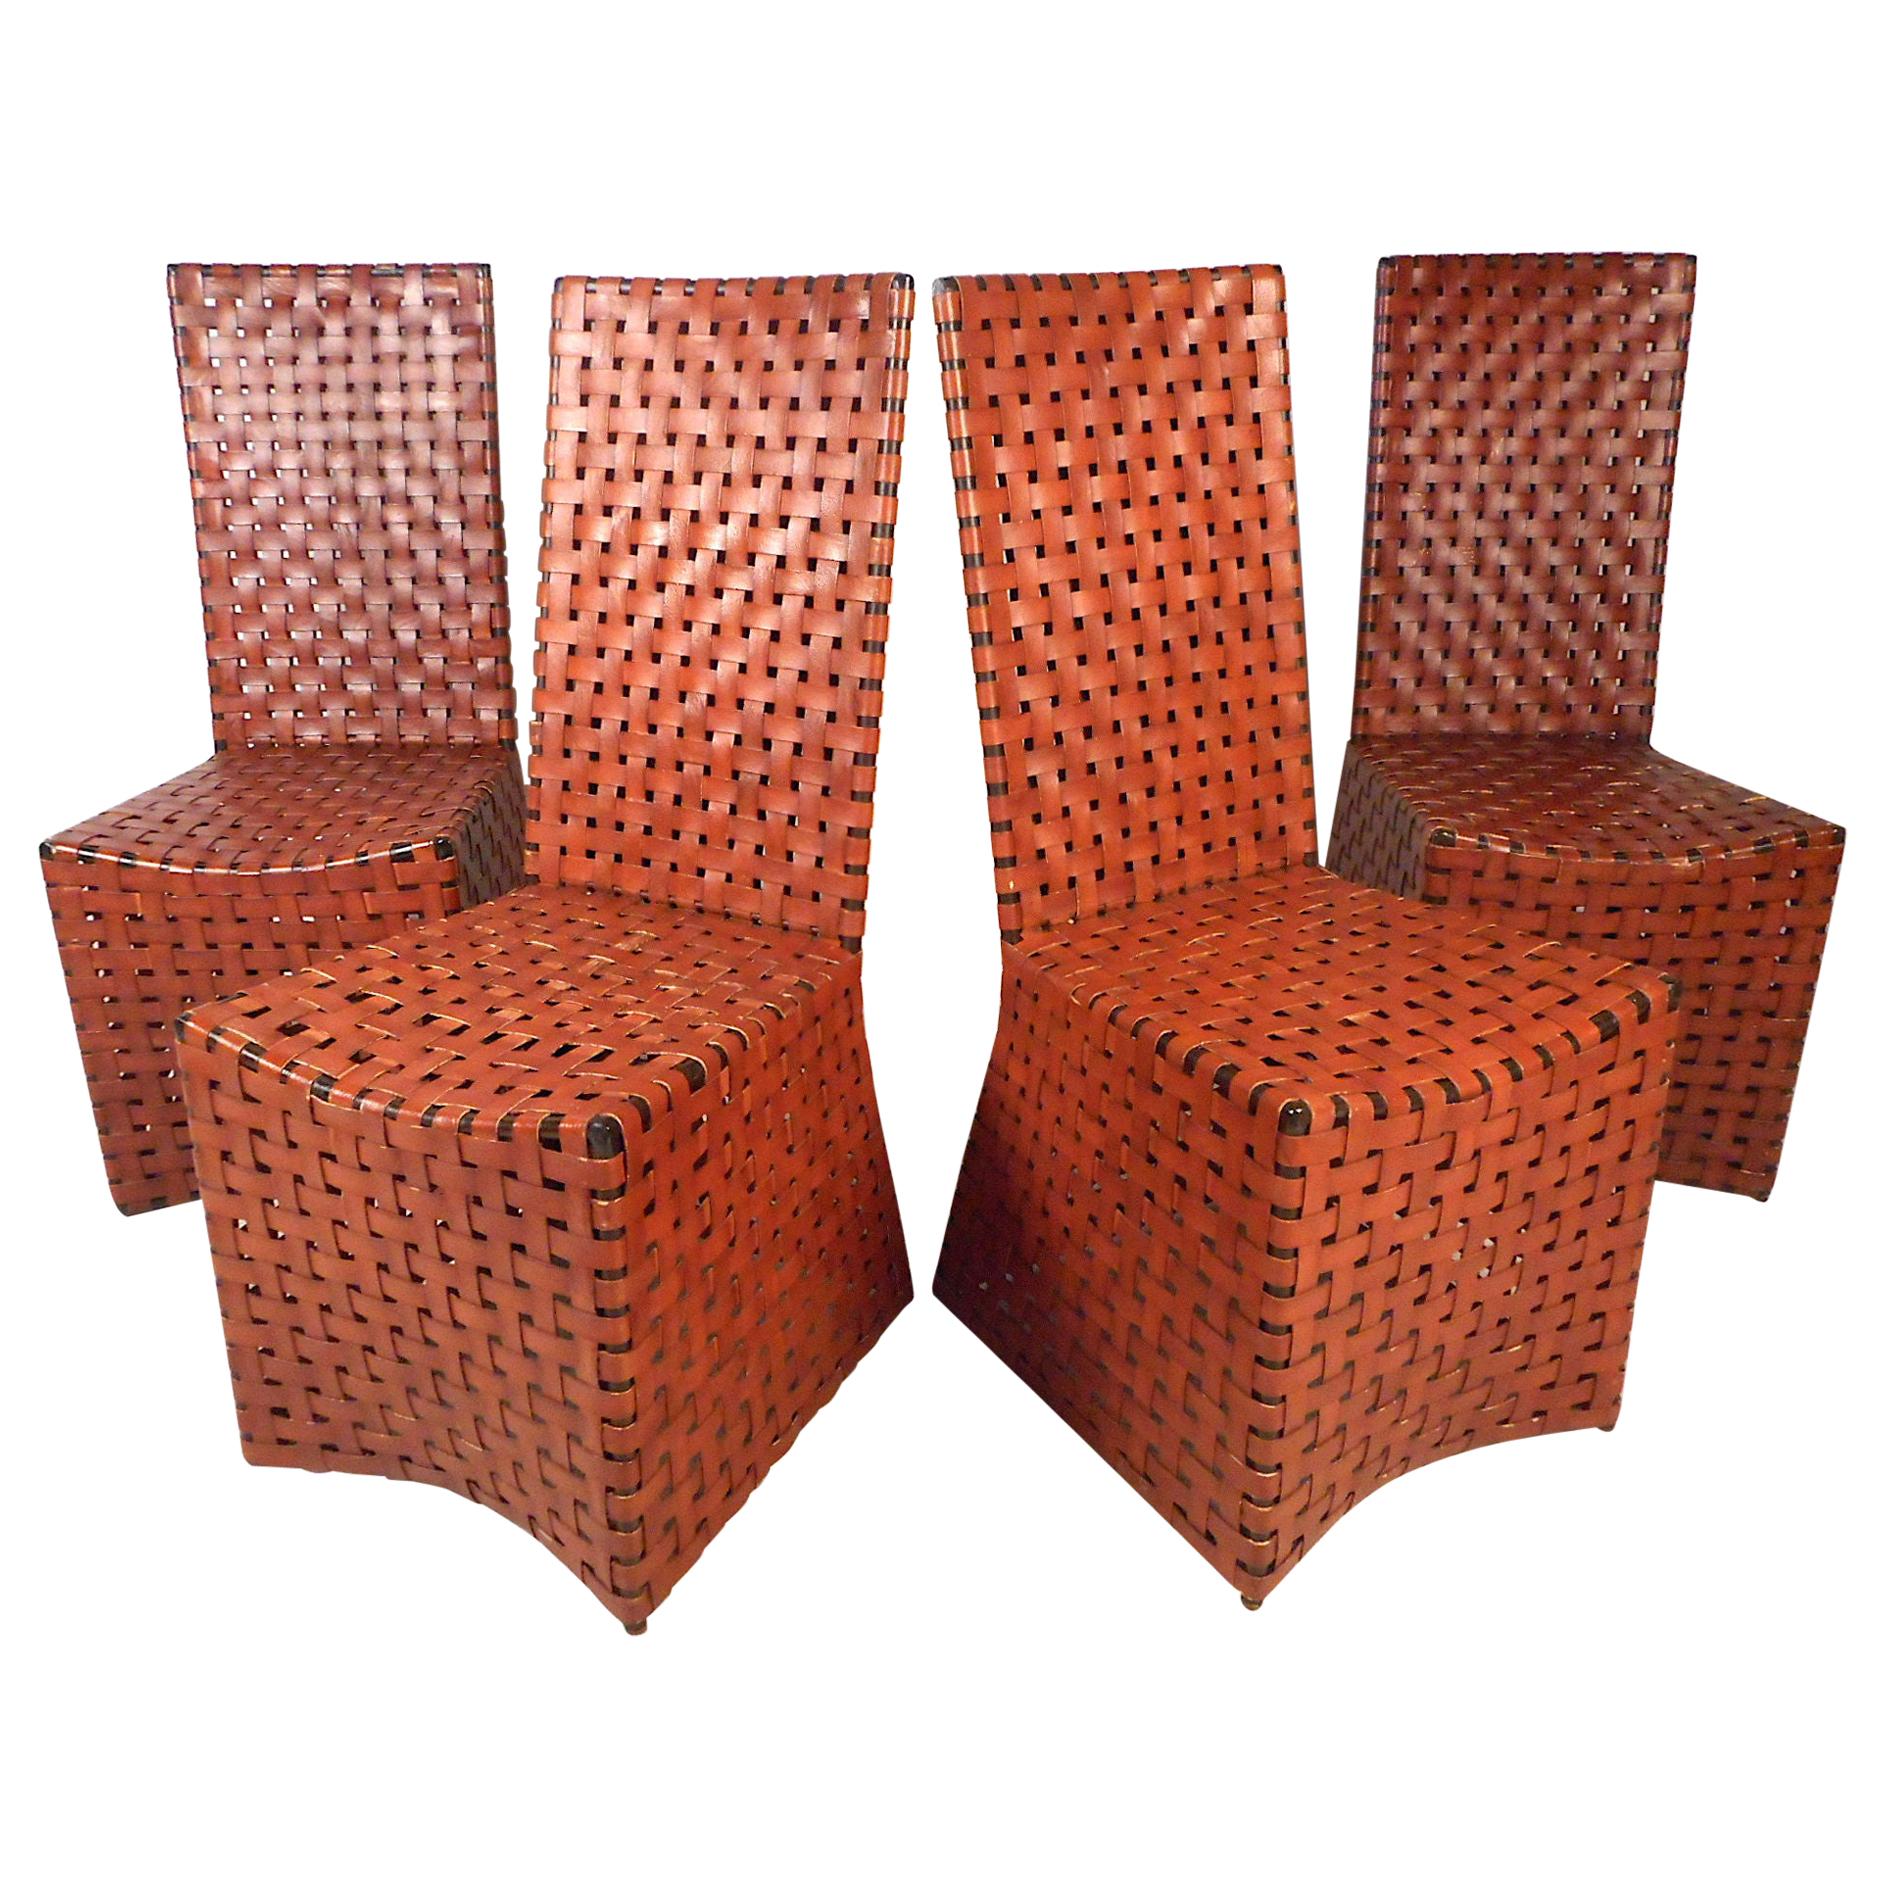 Vintage Modern Woven Leather Chairs, Set of 4